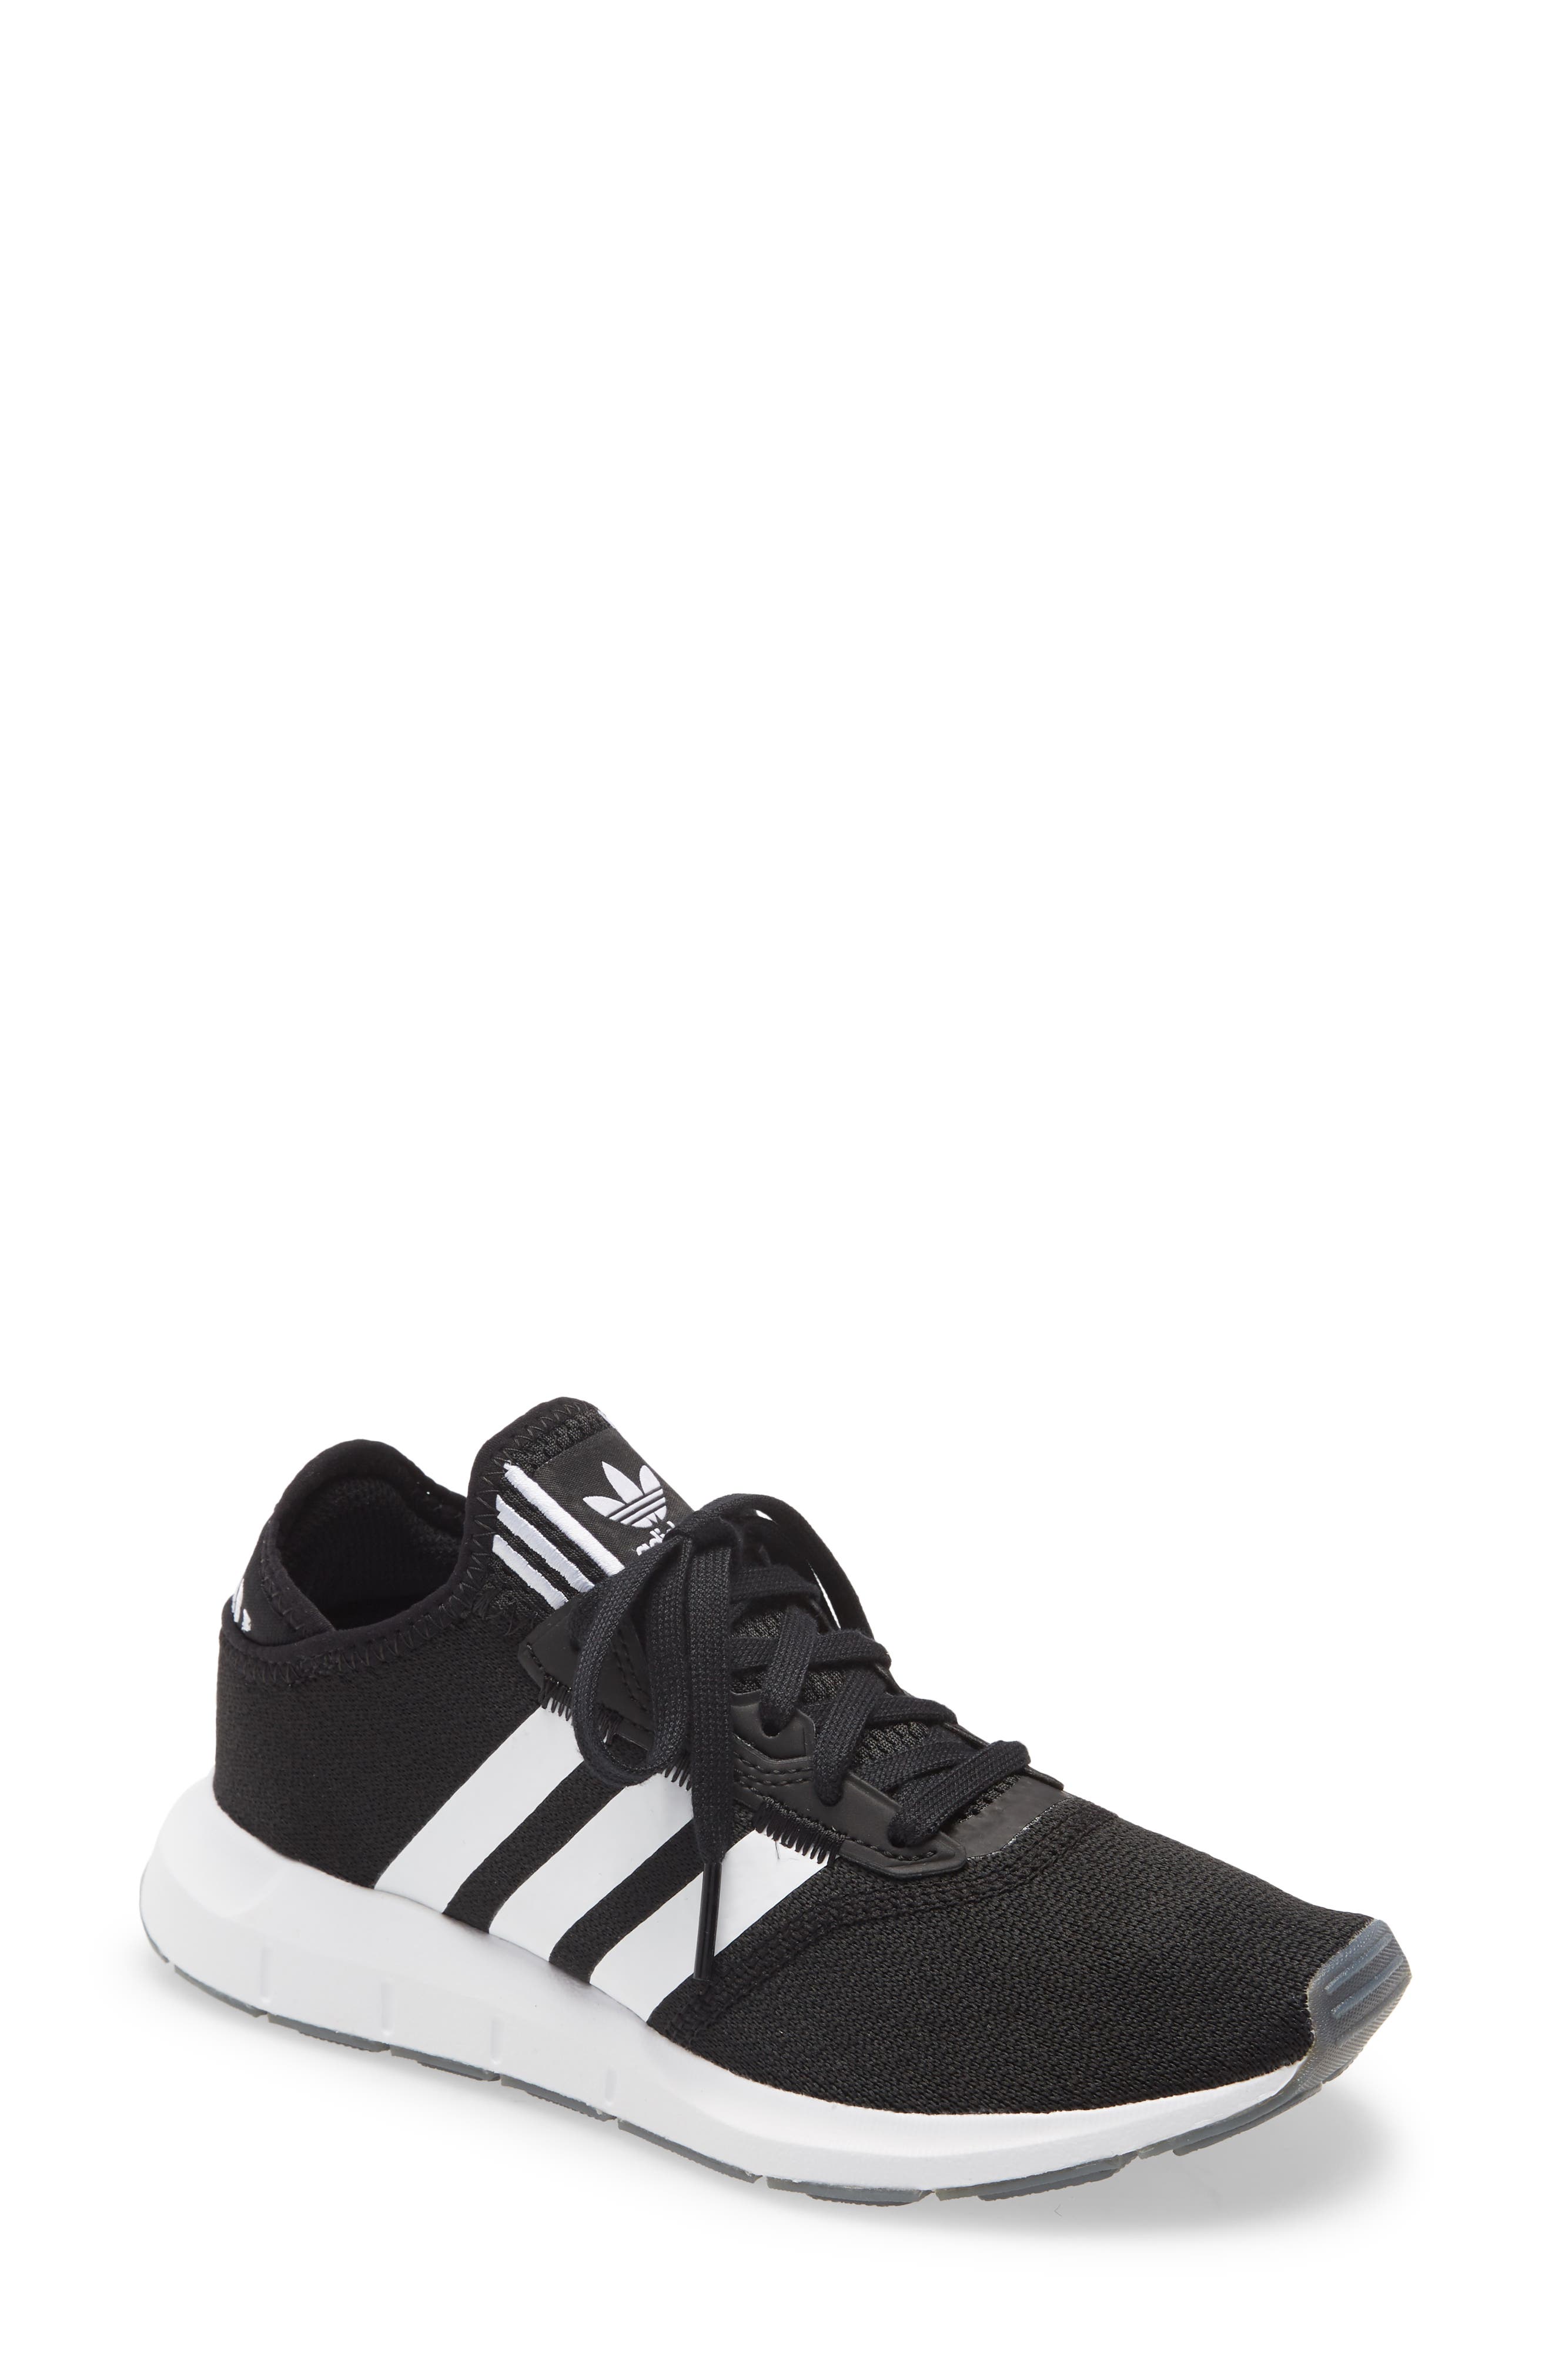 UPC 191983699579 product image for adidas Swift Run X Sneaker in Core Black/White/Silver at Nordstrom, Size 6.5 | upcitemdb.com